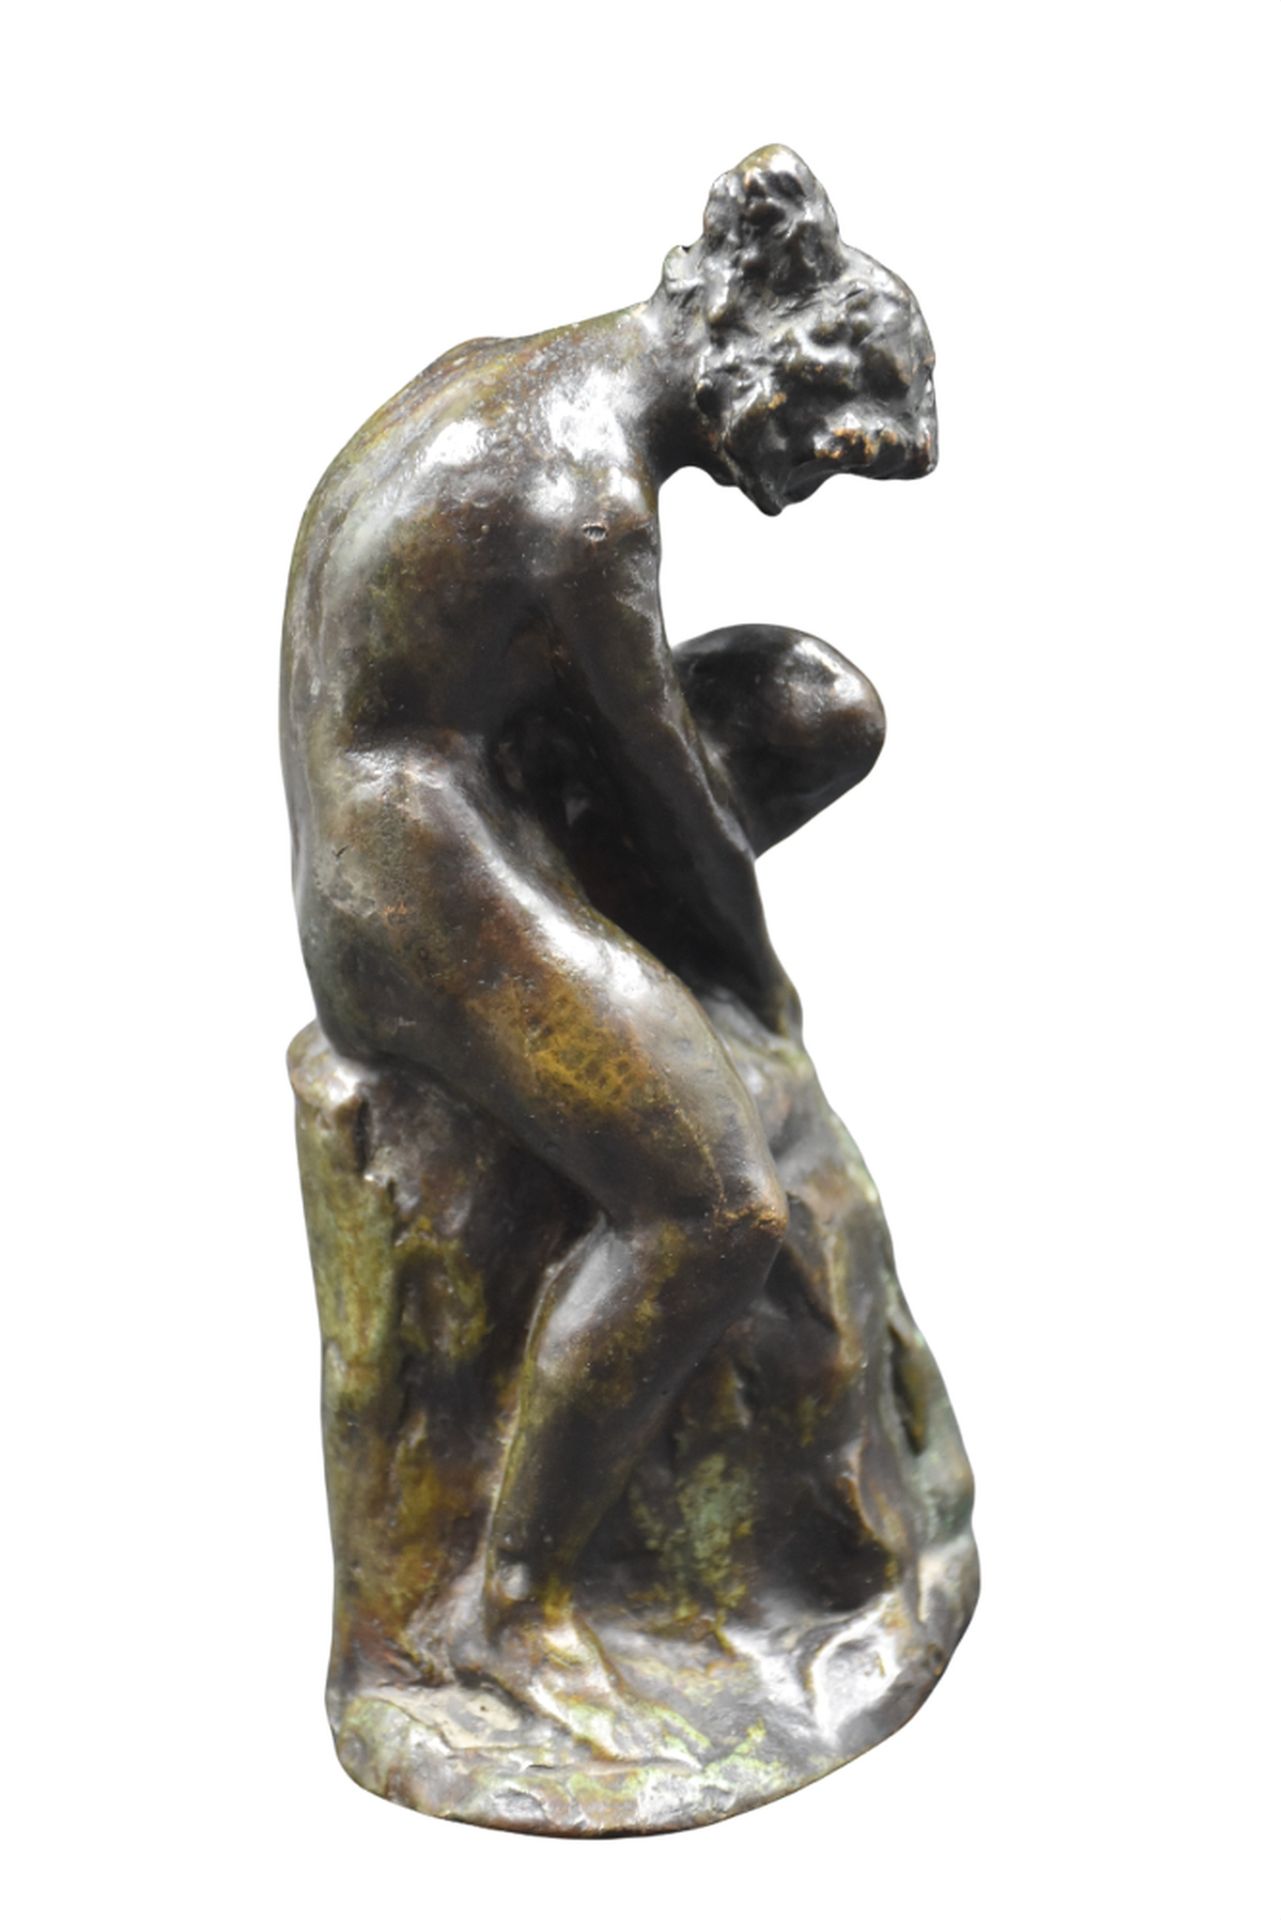 L. PLACE. L. PLACE. Female nude on a rock. Bronze with lost wax. Green patina. F&hellip;